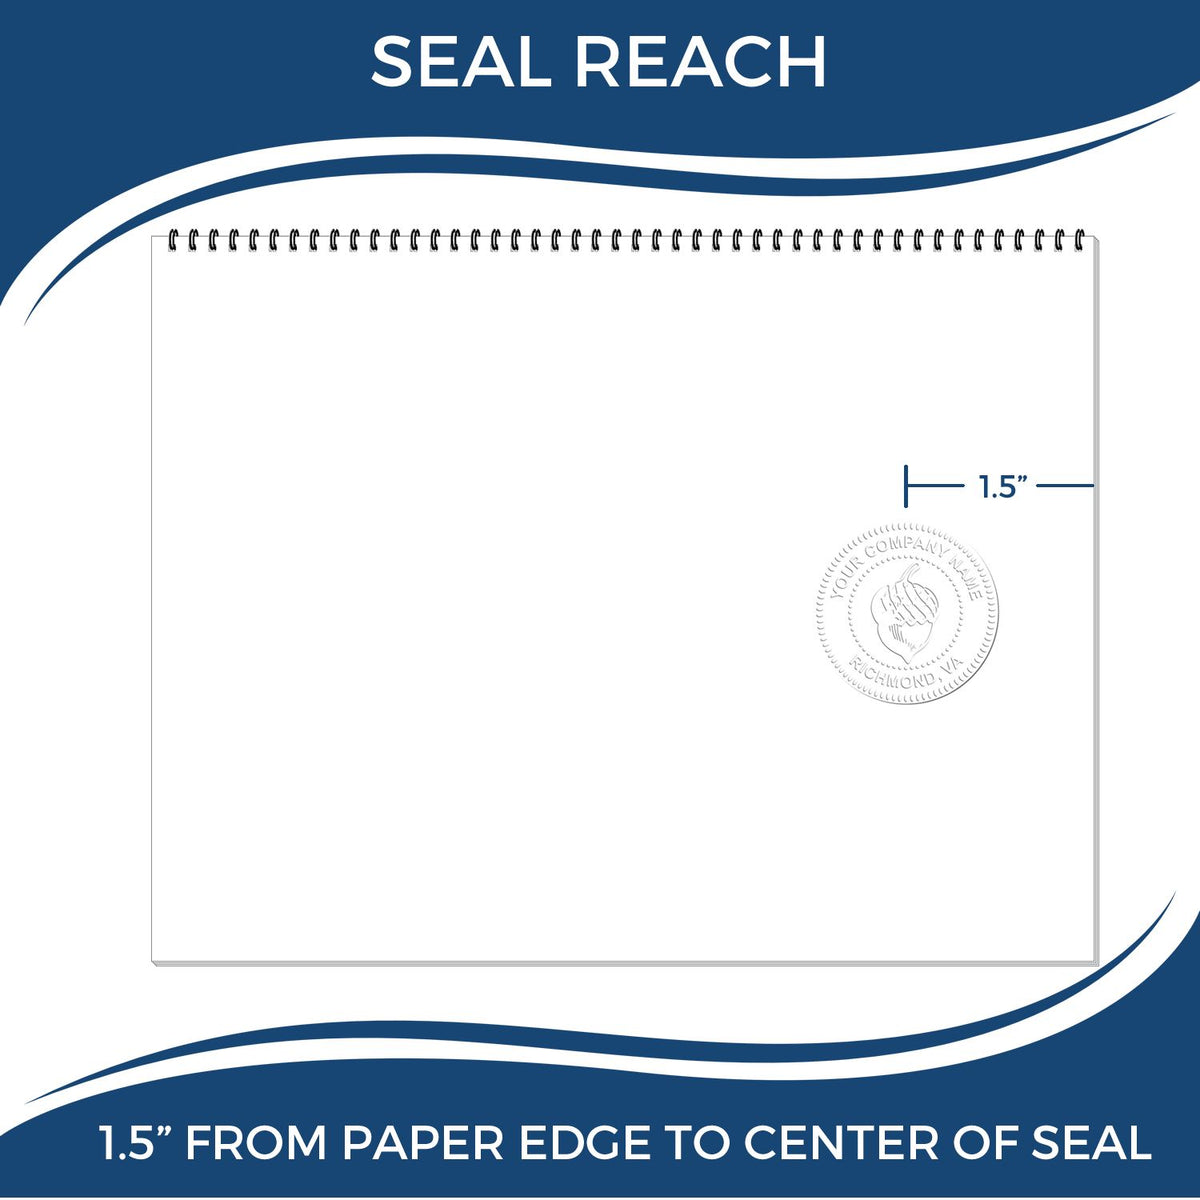 An infographic showing the seal reach which is represented by a ruler and a miniature seal image of the Handheld Vermont Architect Seal Embosser